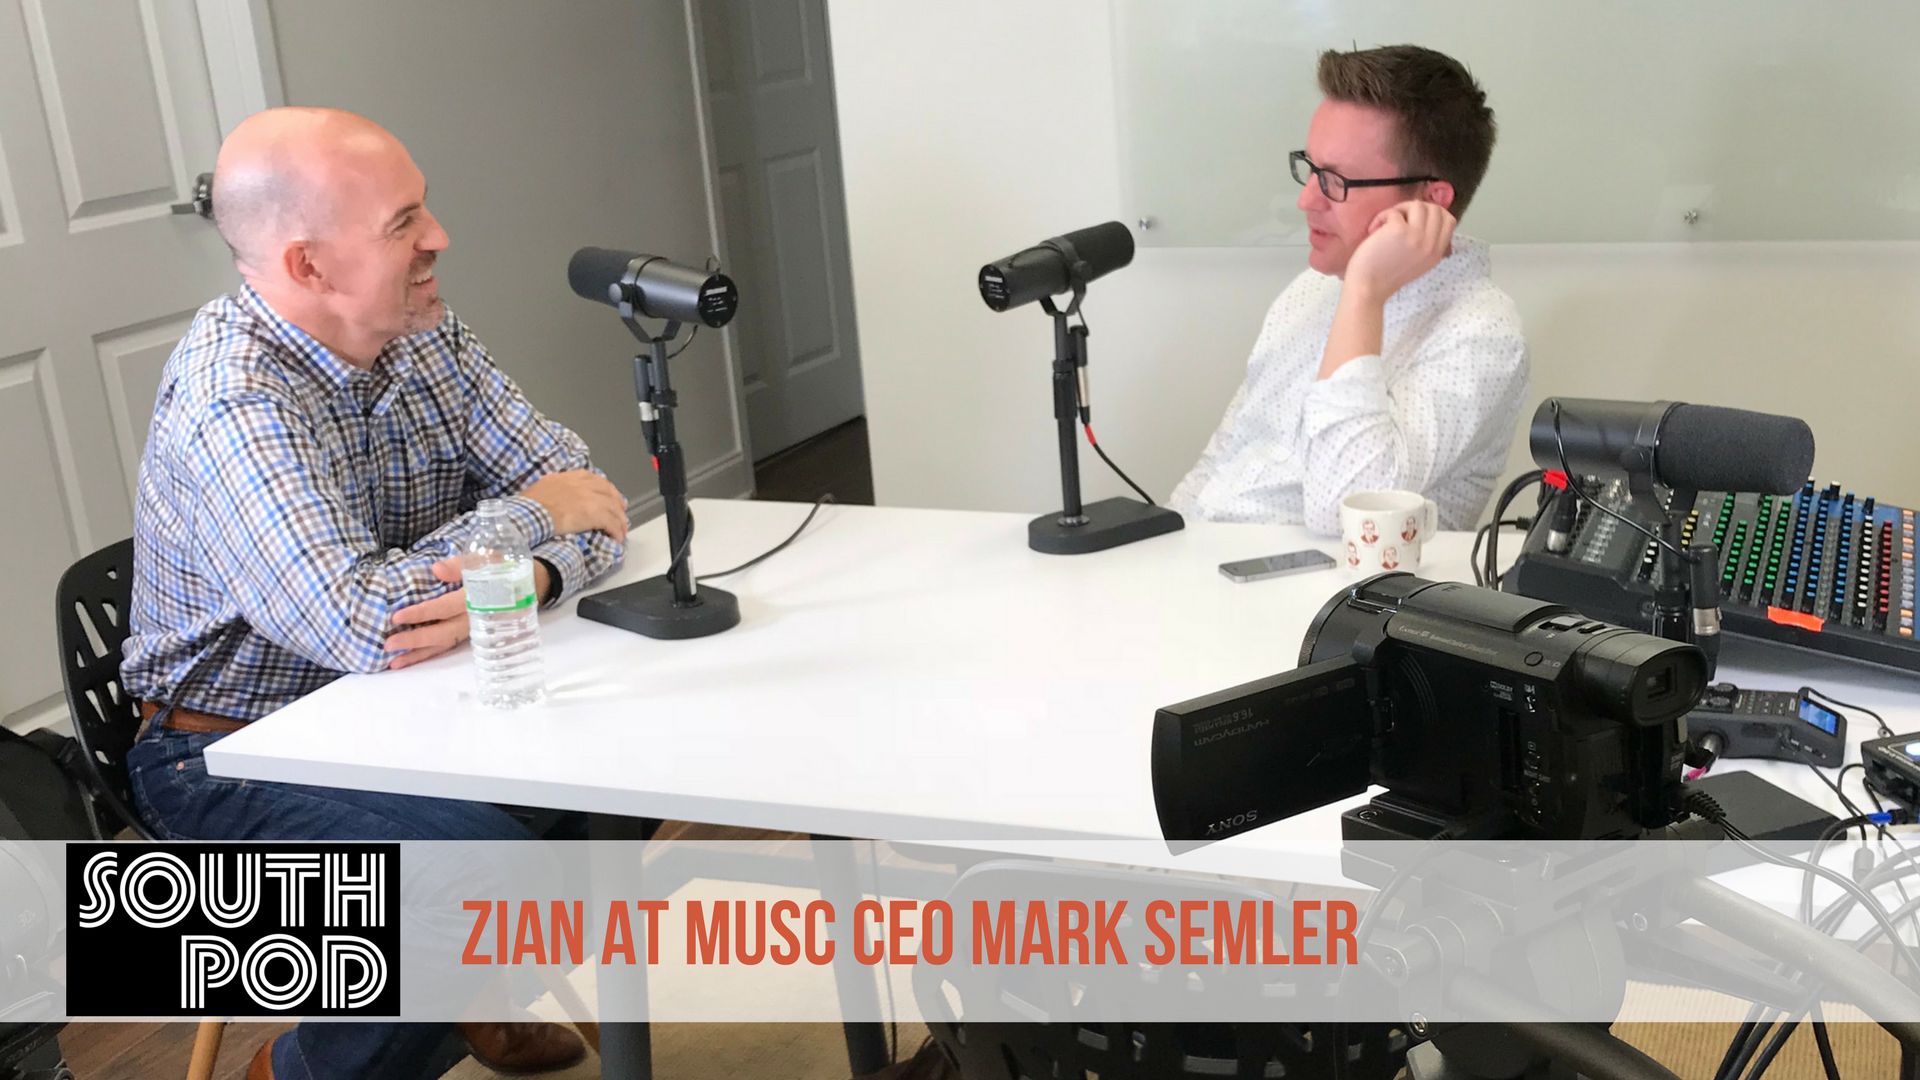 From Gaming to Saving Lives: ZIAN CEO Mark Semler on Moving Medical Products to Market